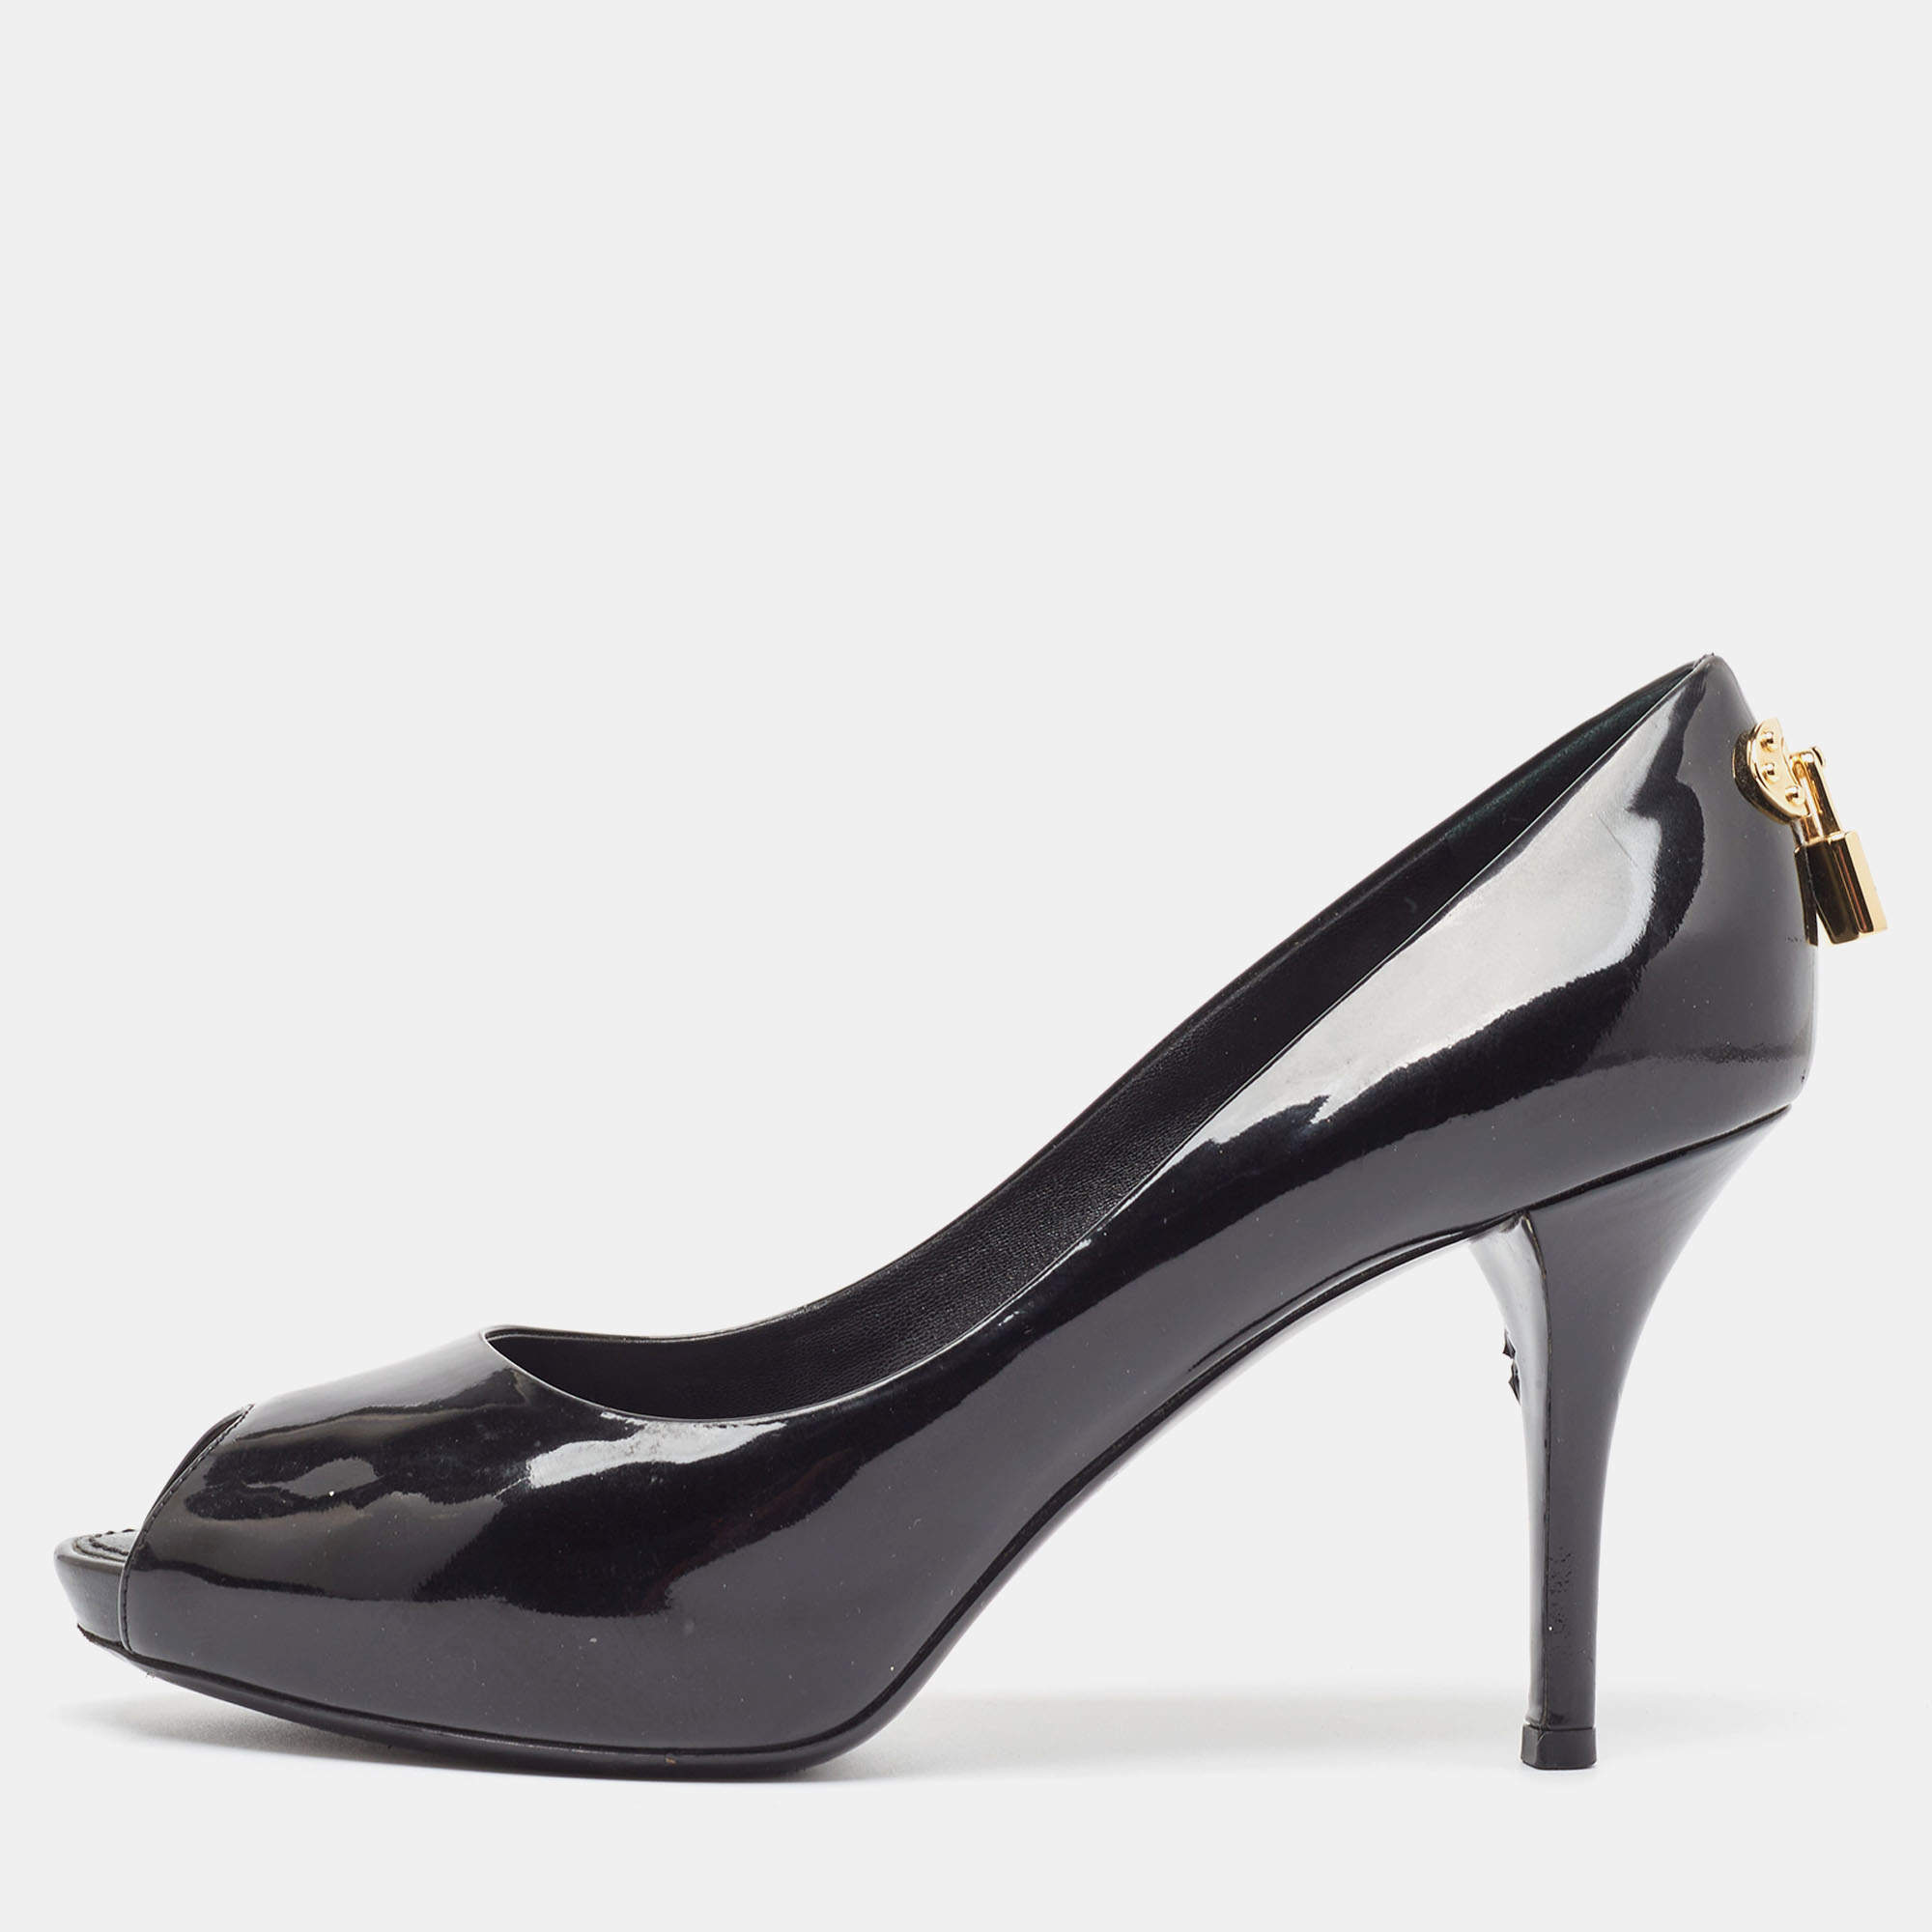 Louis Vuitton Black Patent Leather Oh Really! Pumps Size 38.5